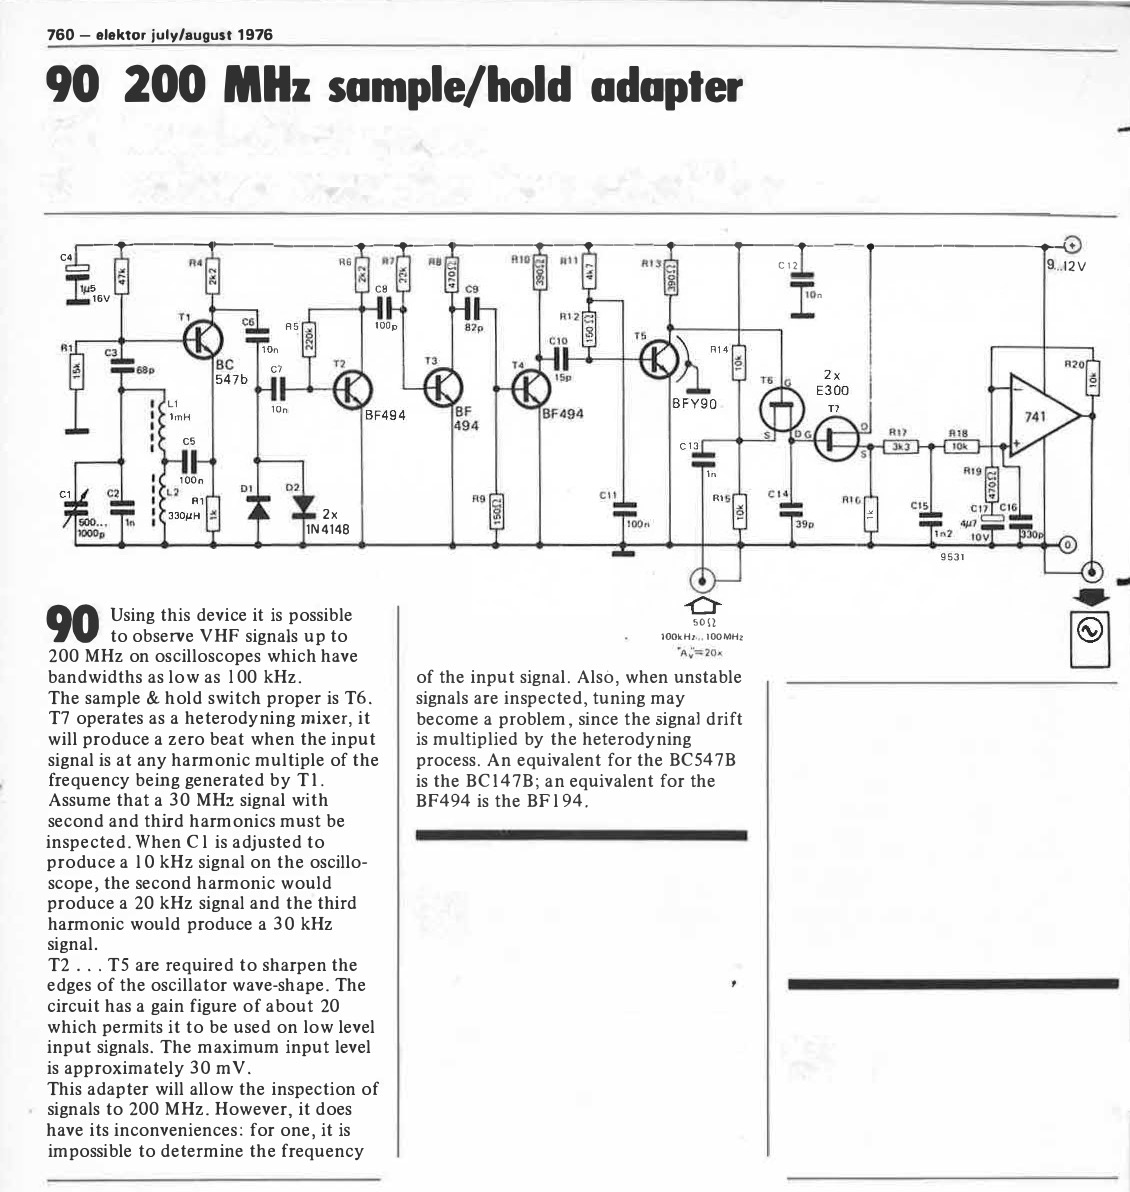 200 MHz sample/hold adapter